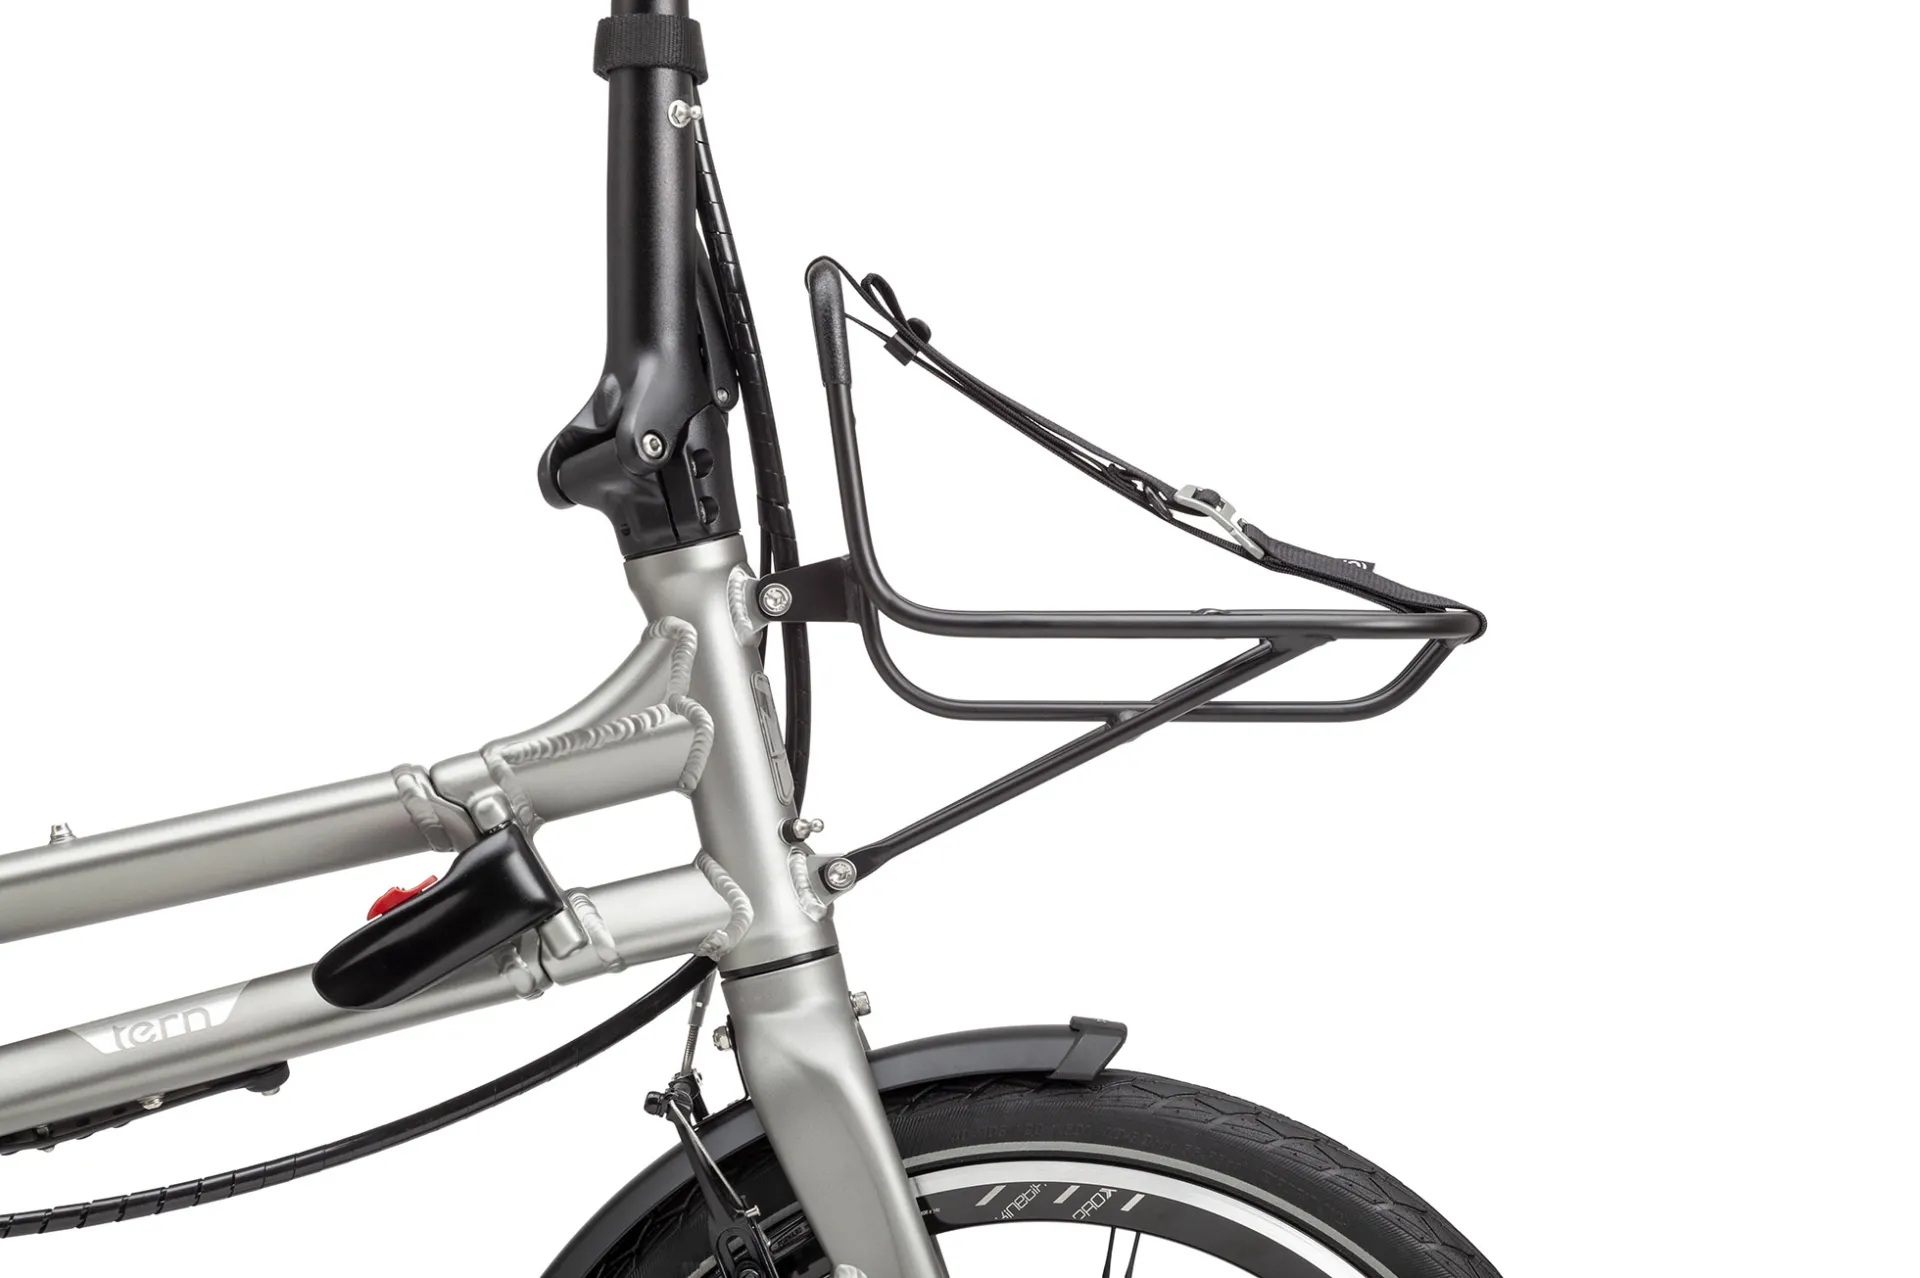 https://www.ternbicycles.com/sites/default/files/styles/extra_large_rectangle_1x/public/images/gear/2019/05/tn-byb-s11-packrack-side-0.jpg.webp?itok=s17r2fUa